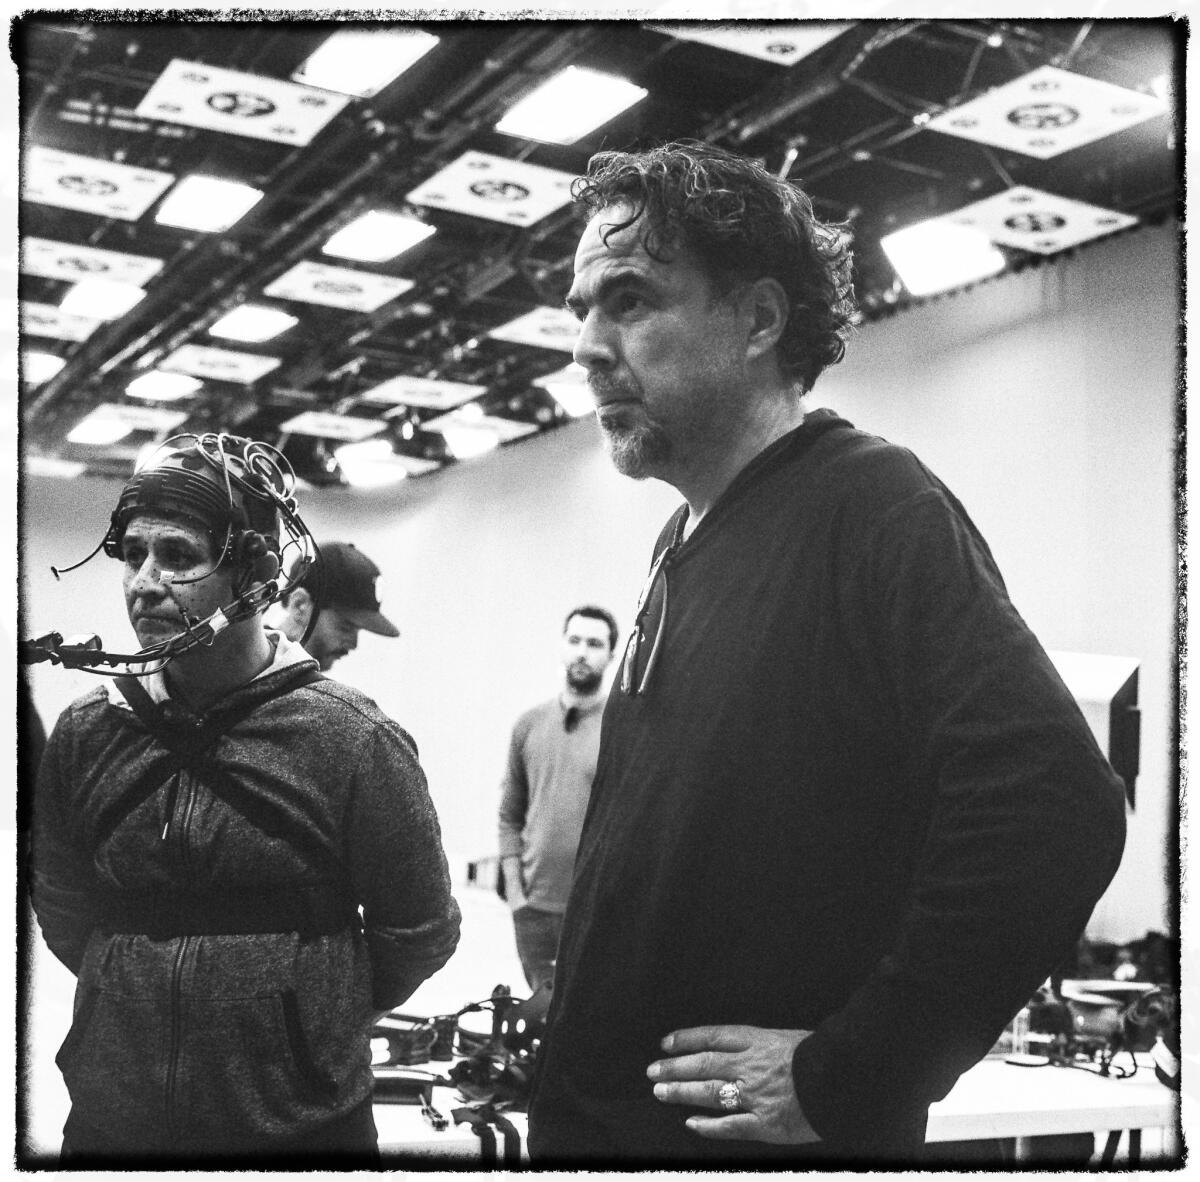 Alejandro G. I?árritu, right, on the set of "Carne y Arena" with a baker from El Salvador named Yoni, who is dressed in a motion-capture suit to help re-create a harrowing moment on his journey to the U.S. (Chachi Ramirez)